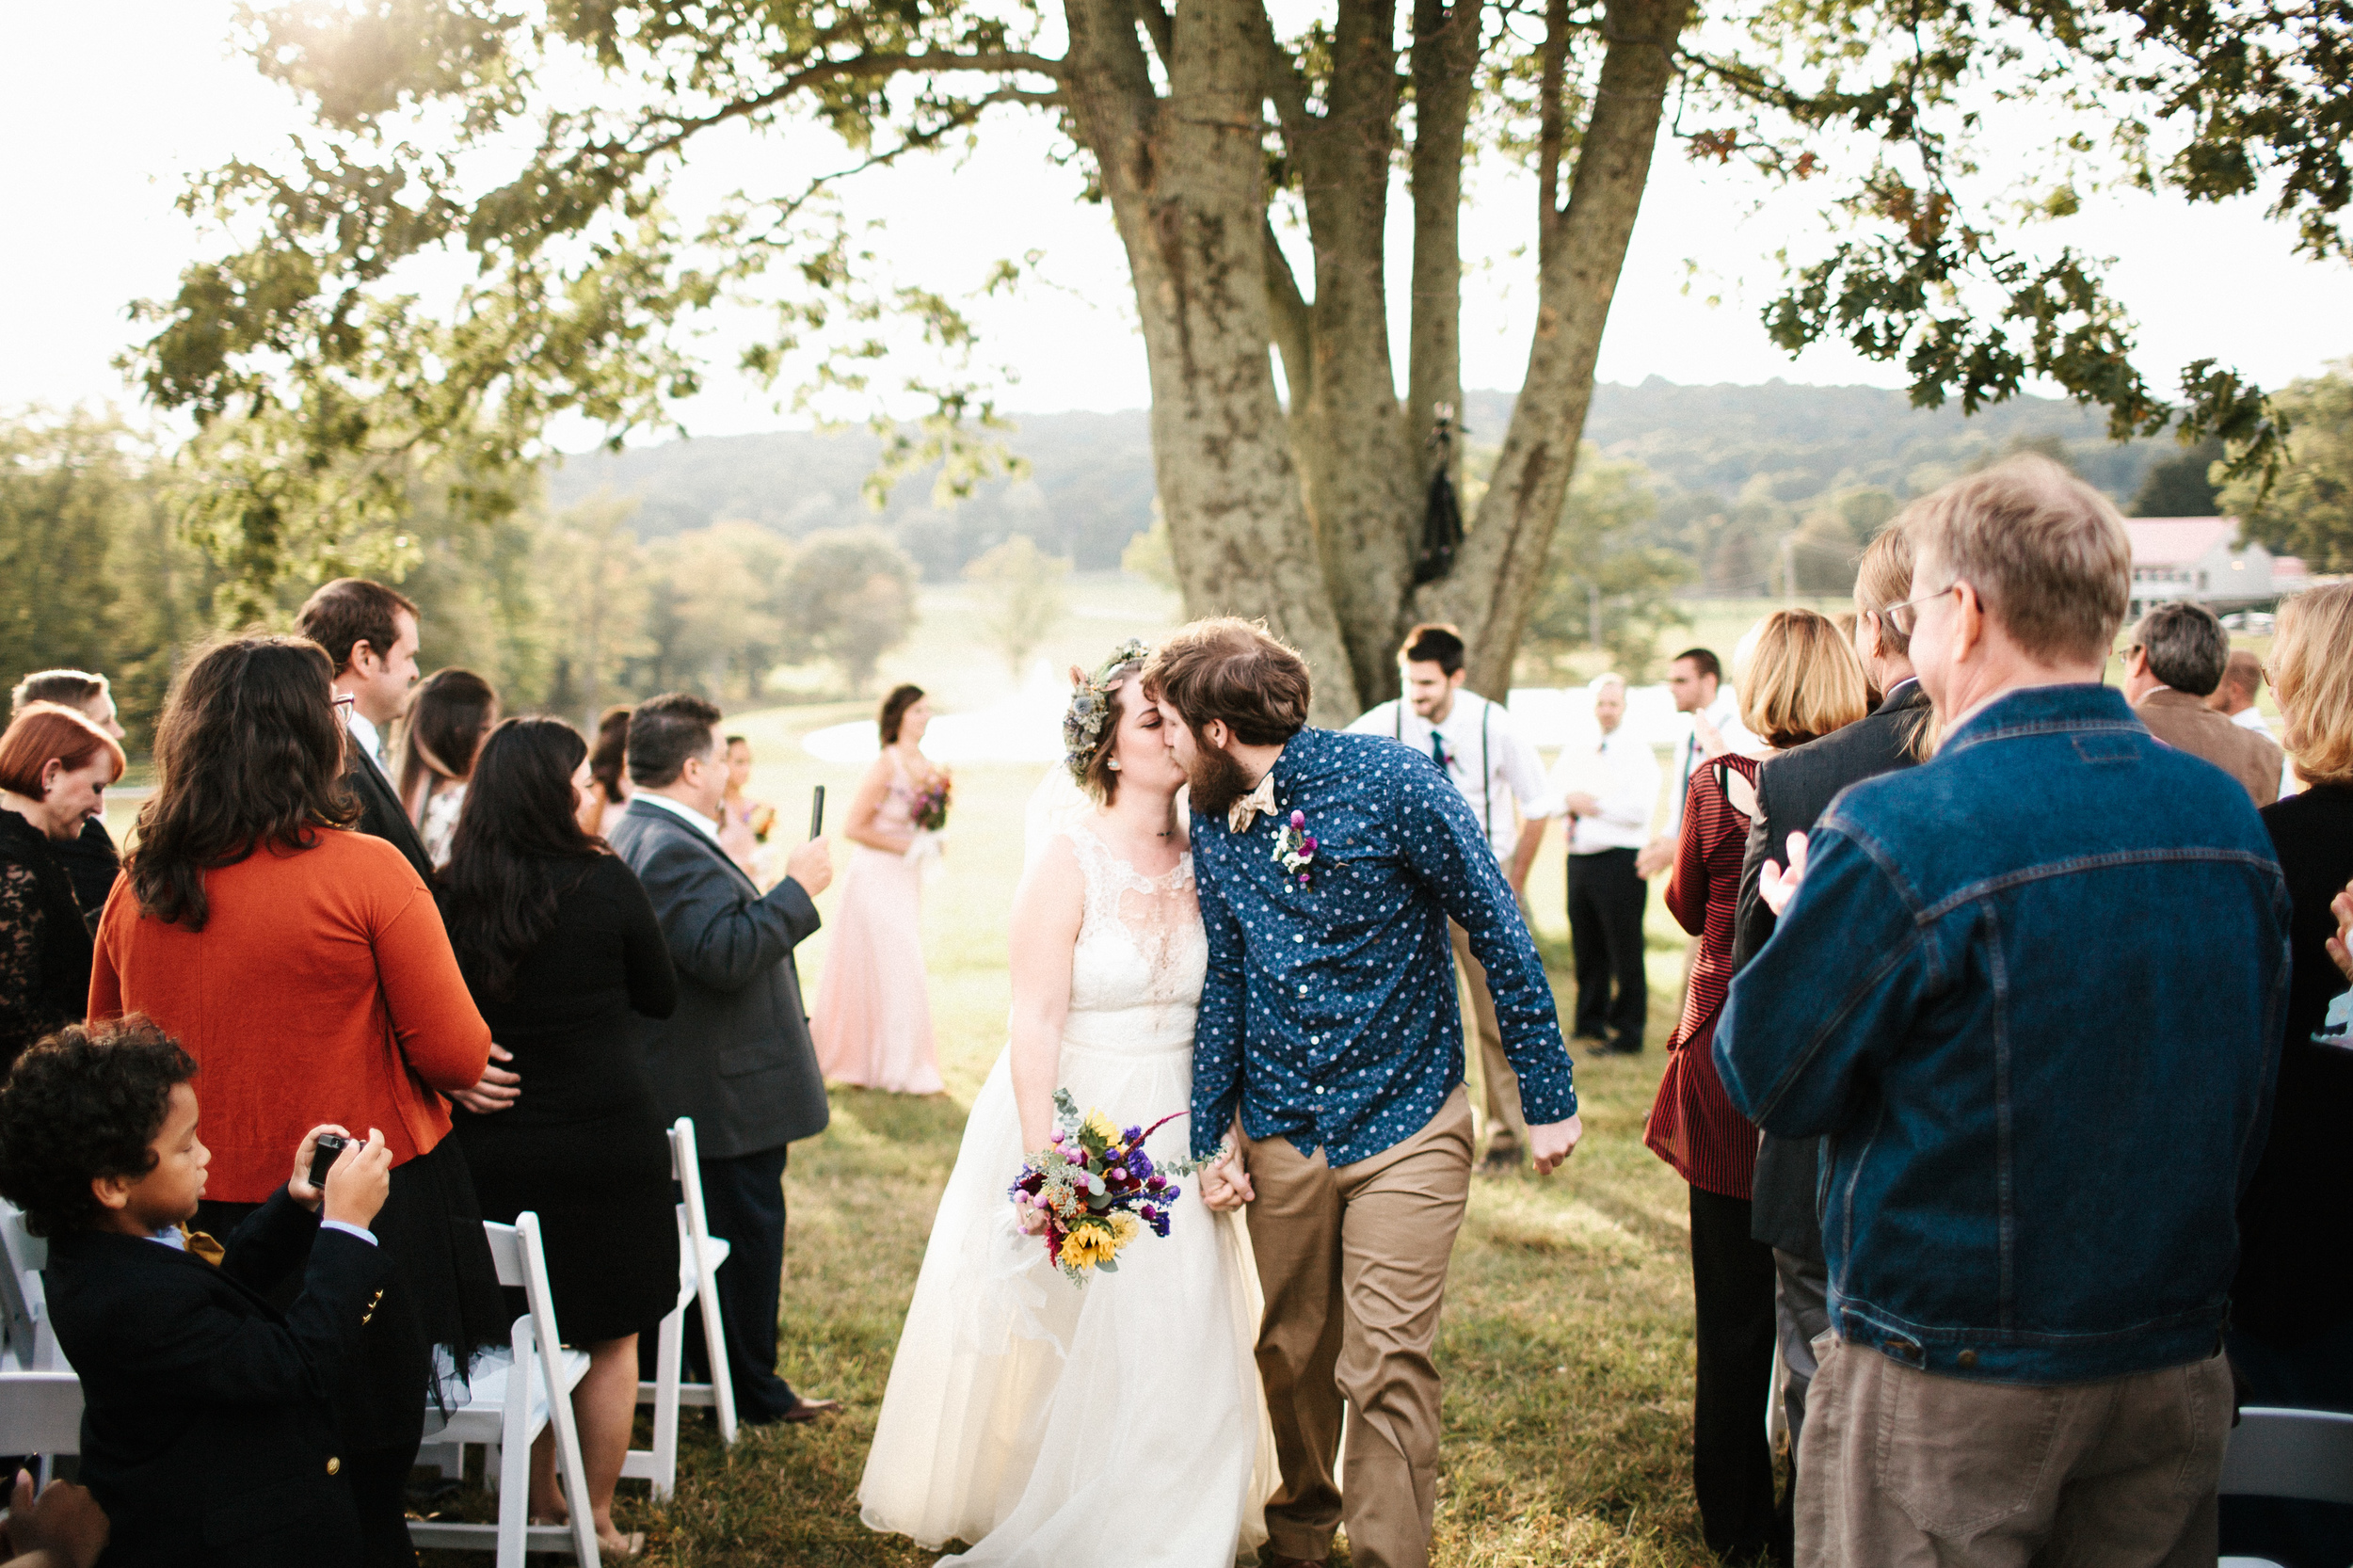  Bride and groom kiss in front of tree in wedding aisle. 